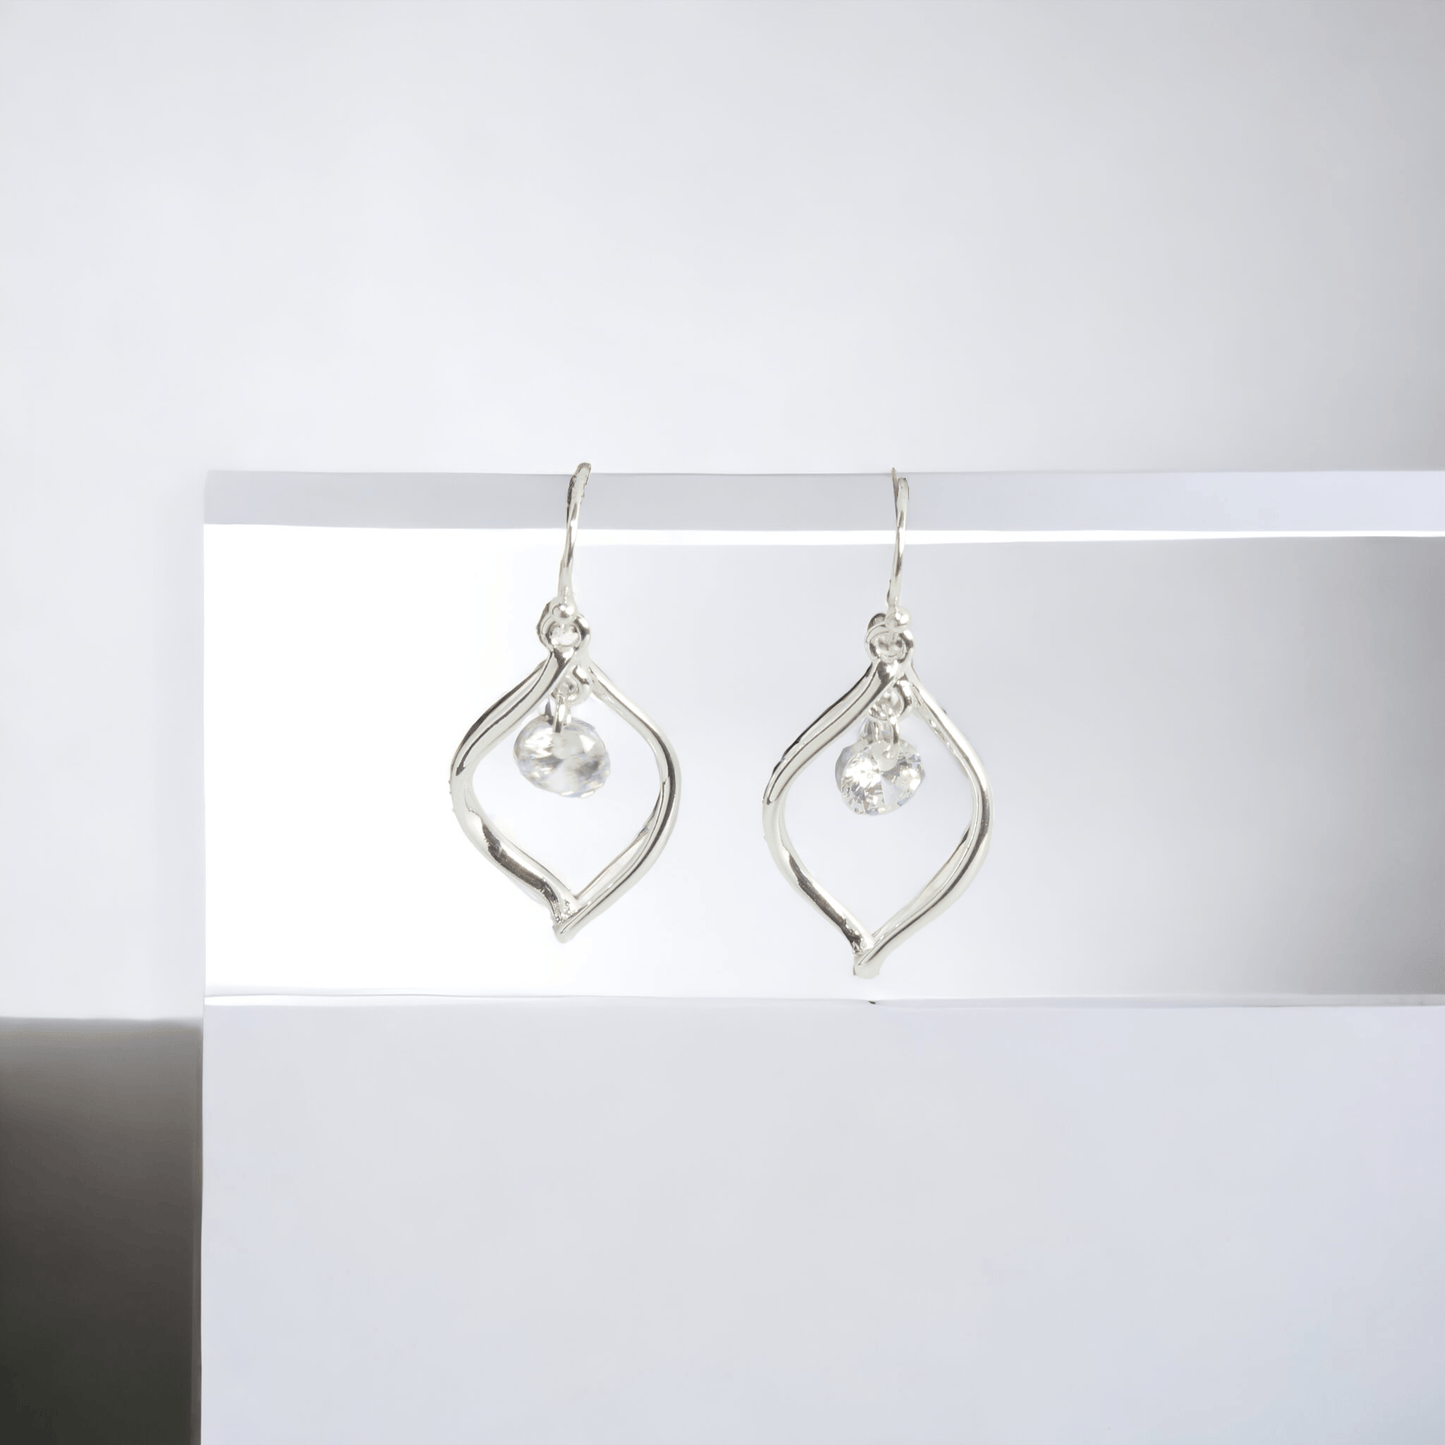 Tear Drop Earrings with Floating Crystal - J & S Expressions